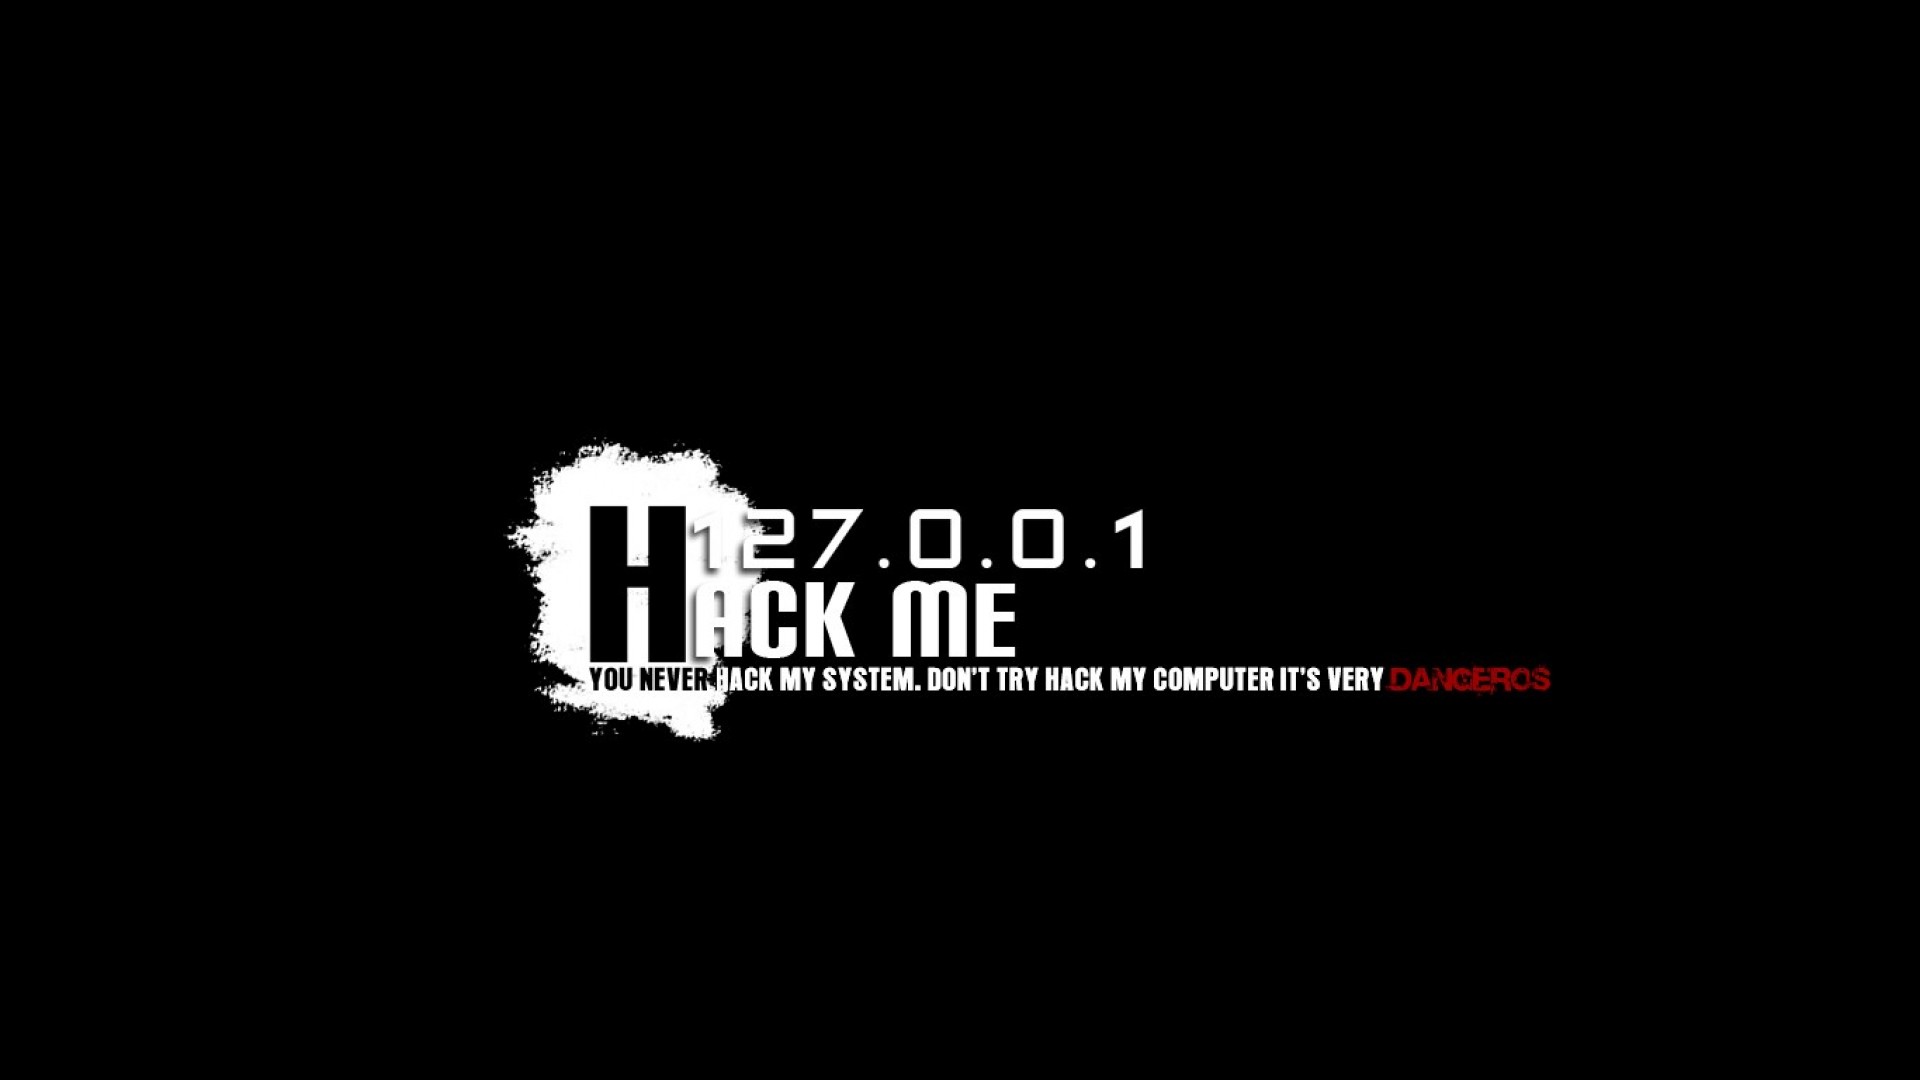    HD Wallpapers From All Kinds To Download Hack Me wallpaper 1920x1080